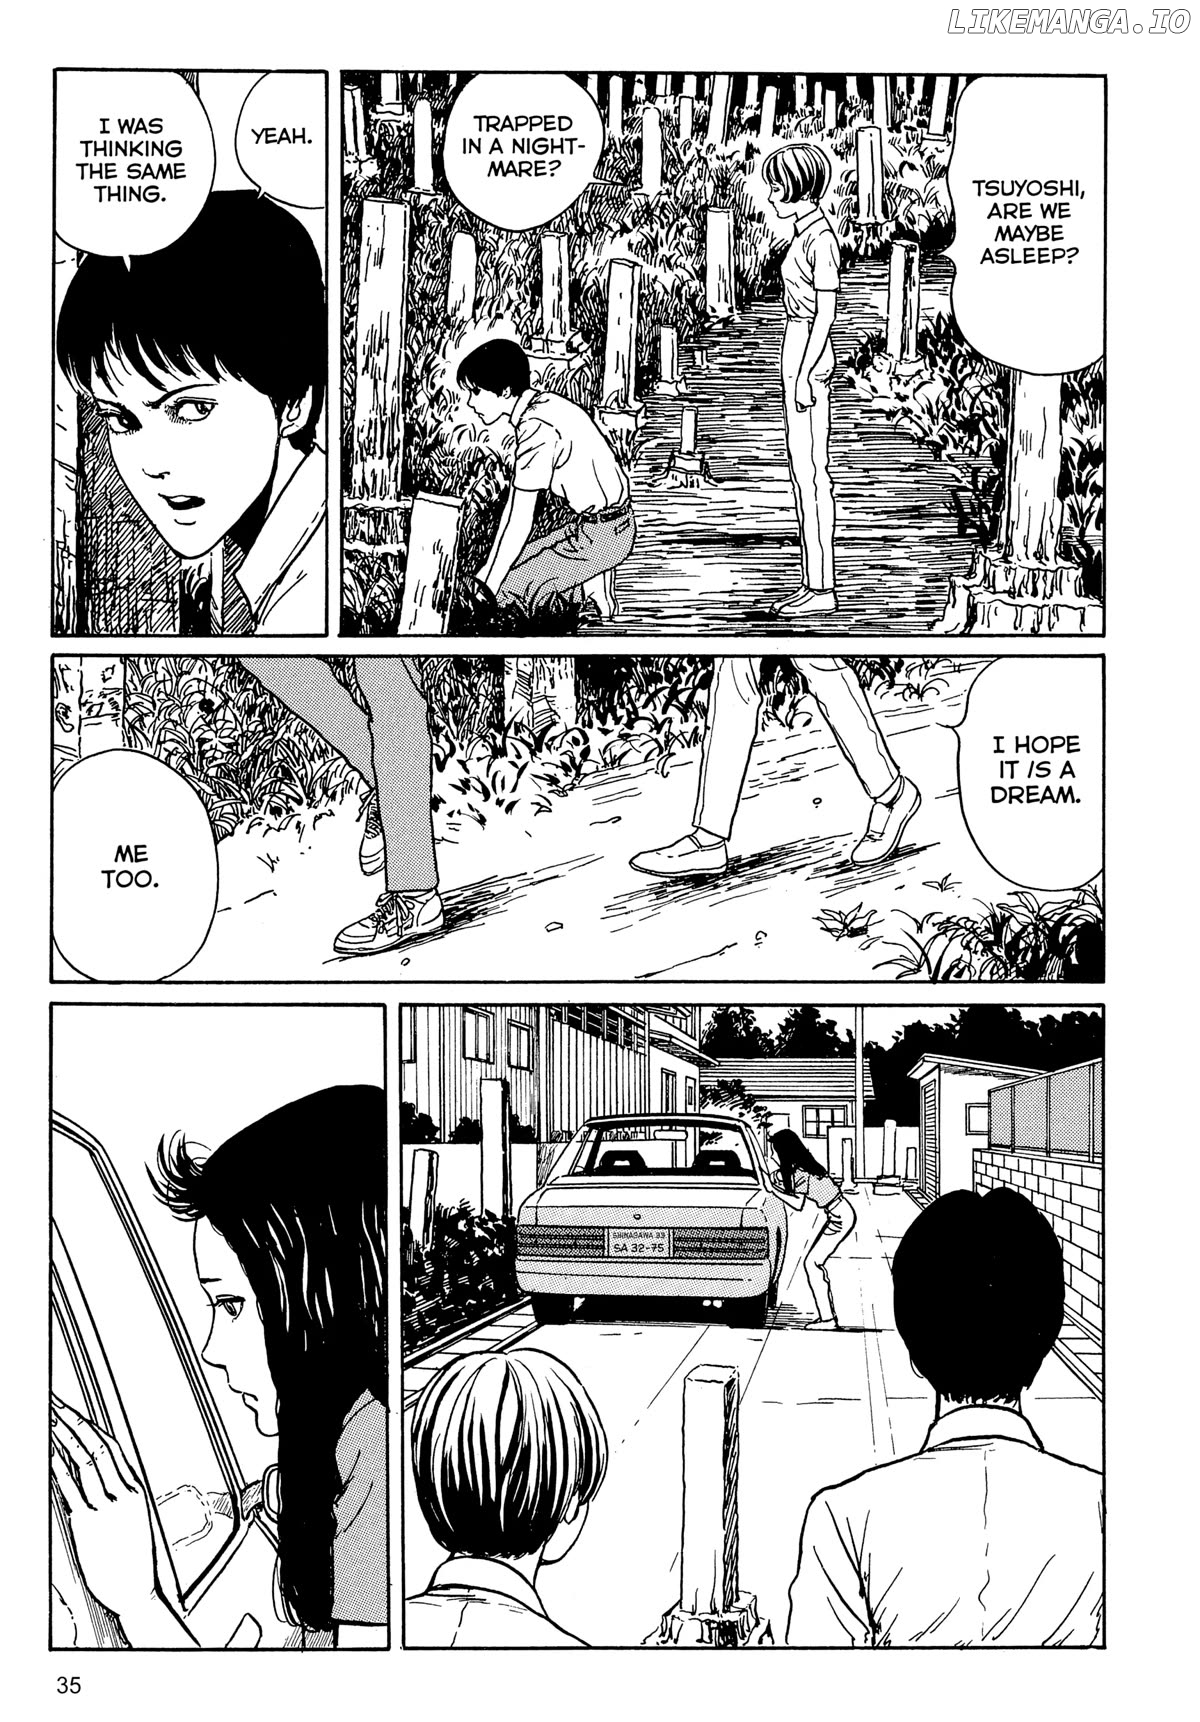 Tombs - Junji Ito Story Collection chapter 1 - page 36